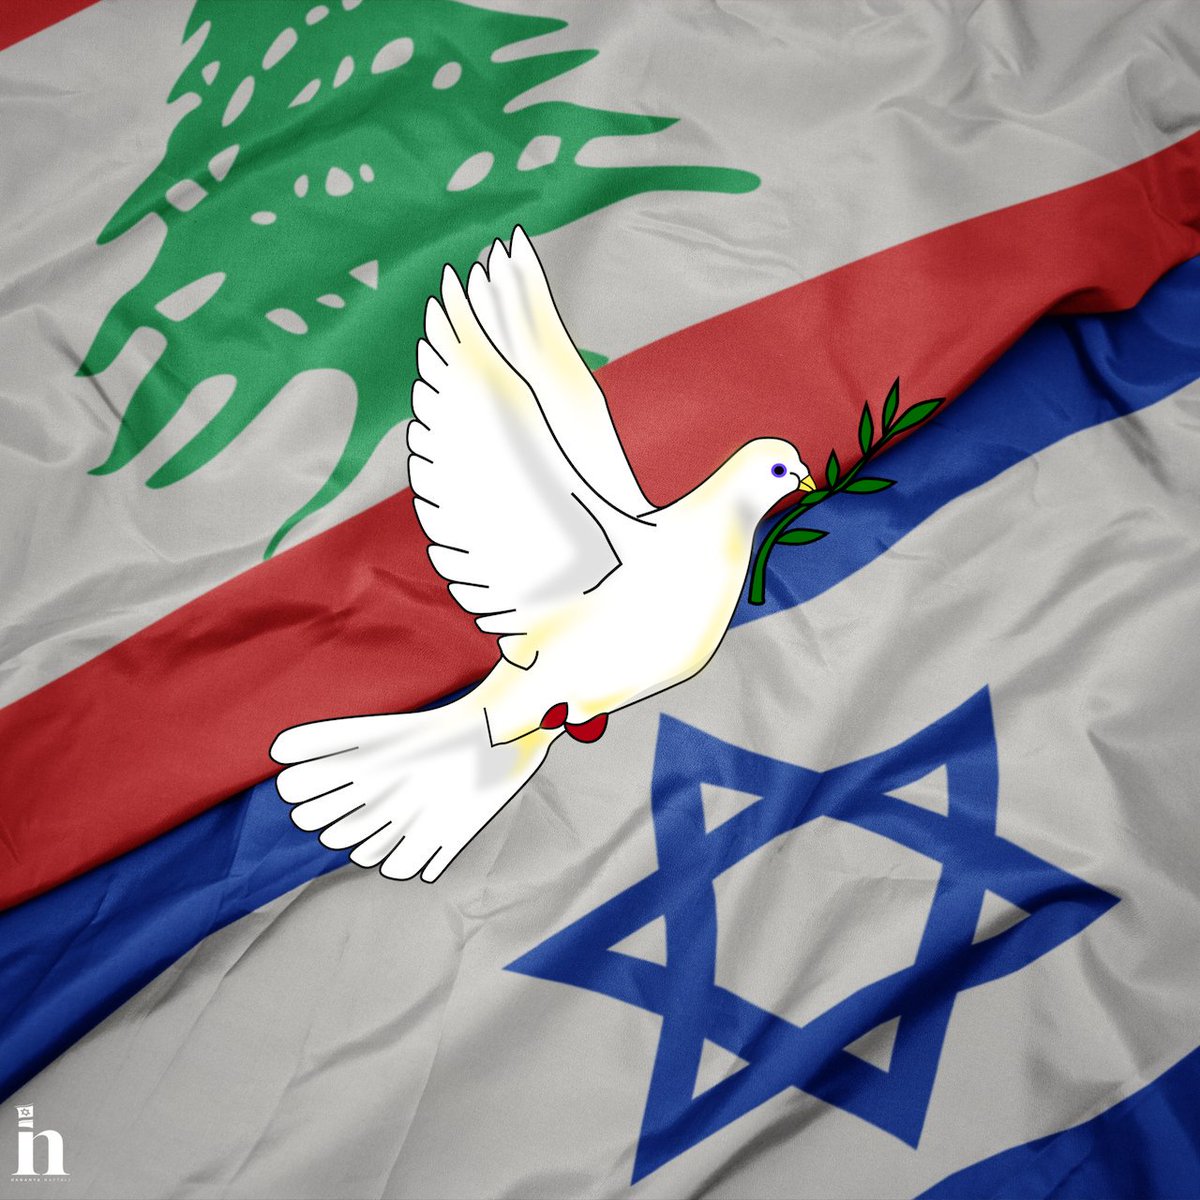 Hananya Naftali on Twitter: "I pray for Lebanon from Israel. 🇮🇱🙏🇱🇧 A  while ago, a man from Southern #Lebanon messaged me & expressed love for  Israel & wish for Hezbollah's fall. He